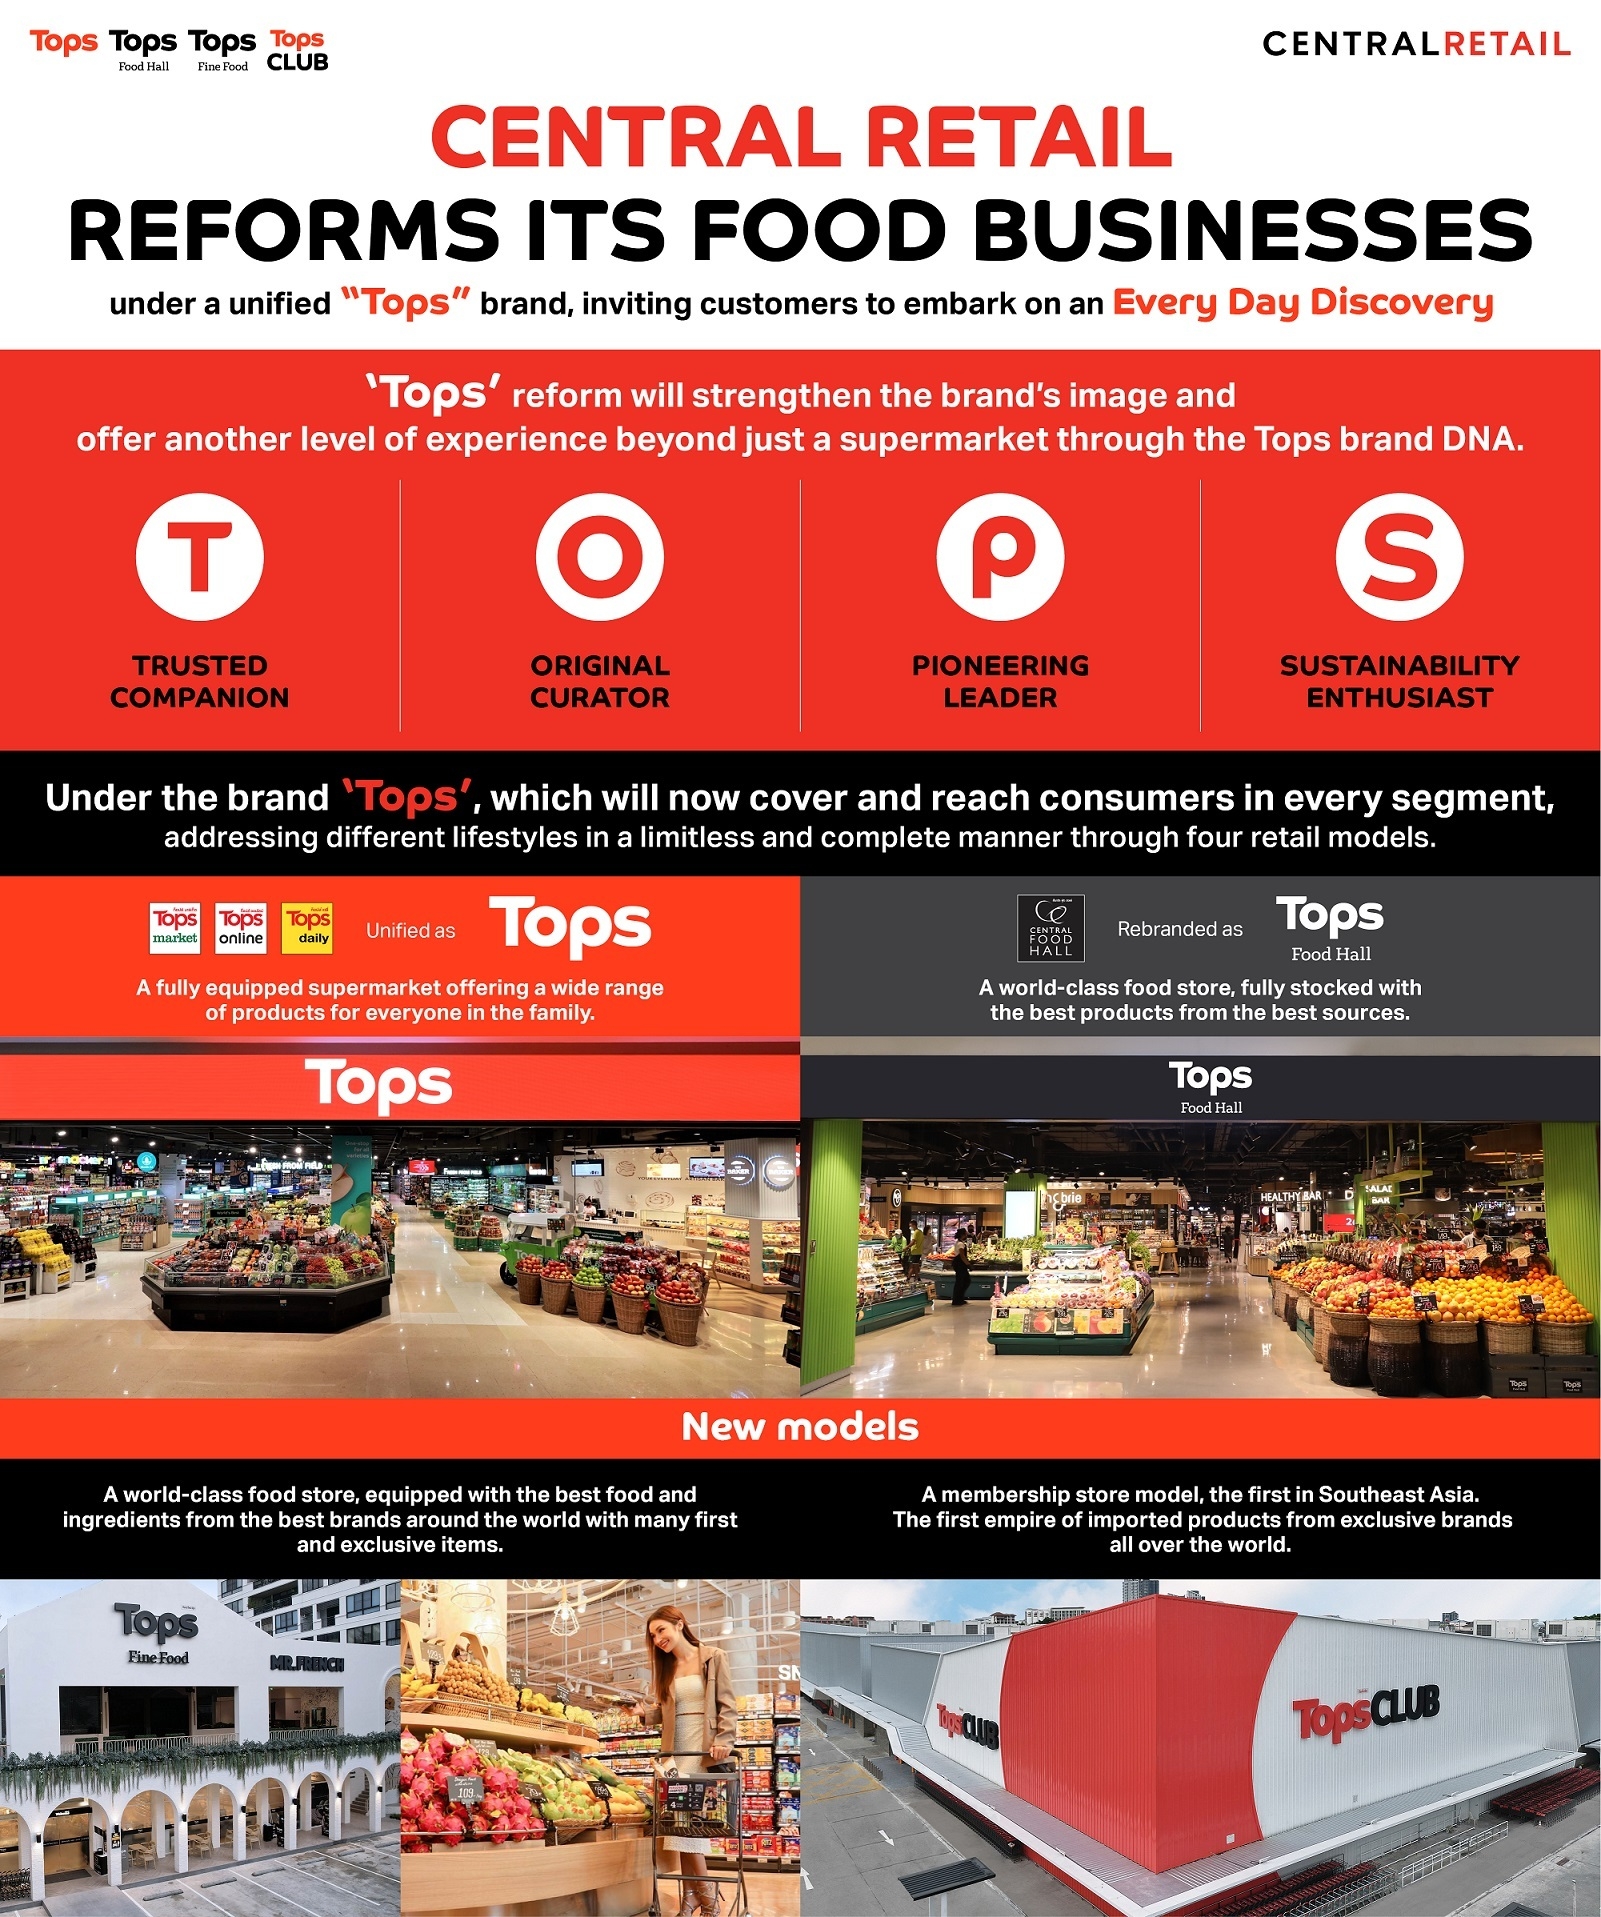 Central Retail reforms its food businesses